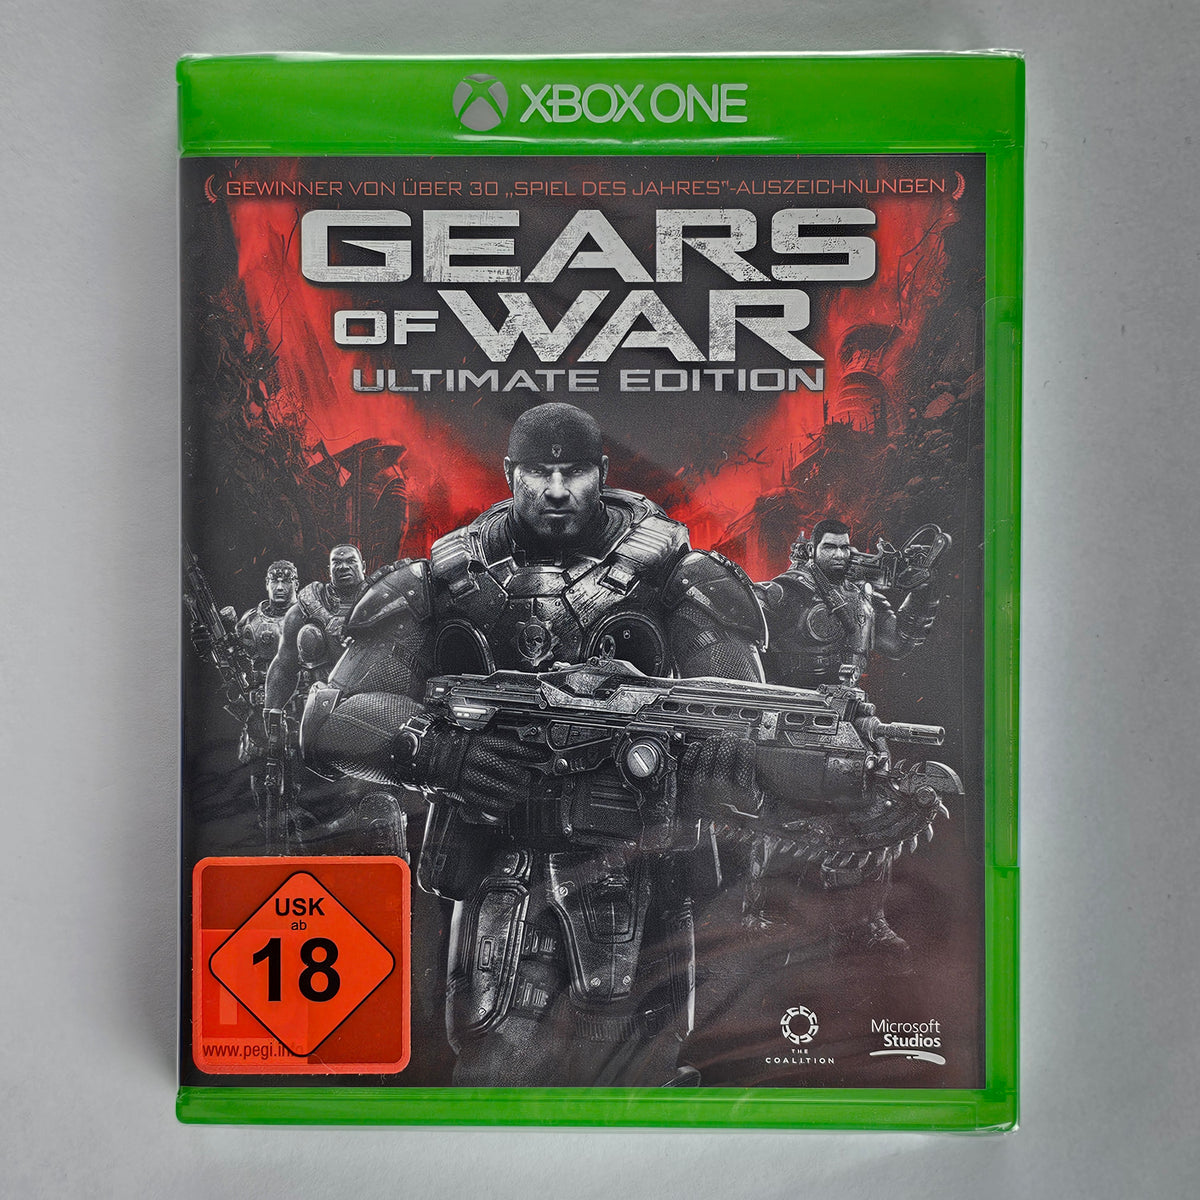 Gears of War: Ultimate Edition [XBOXO]